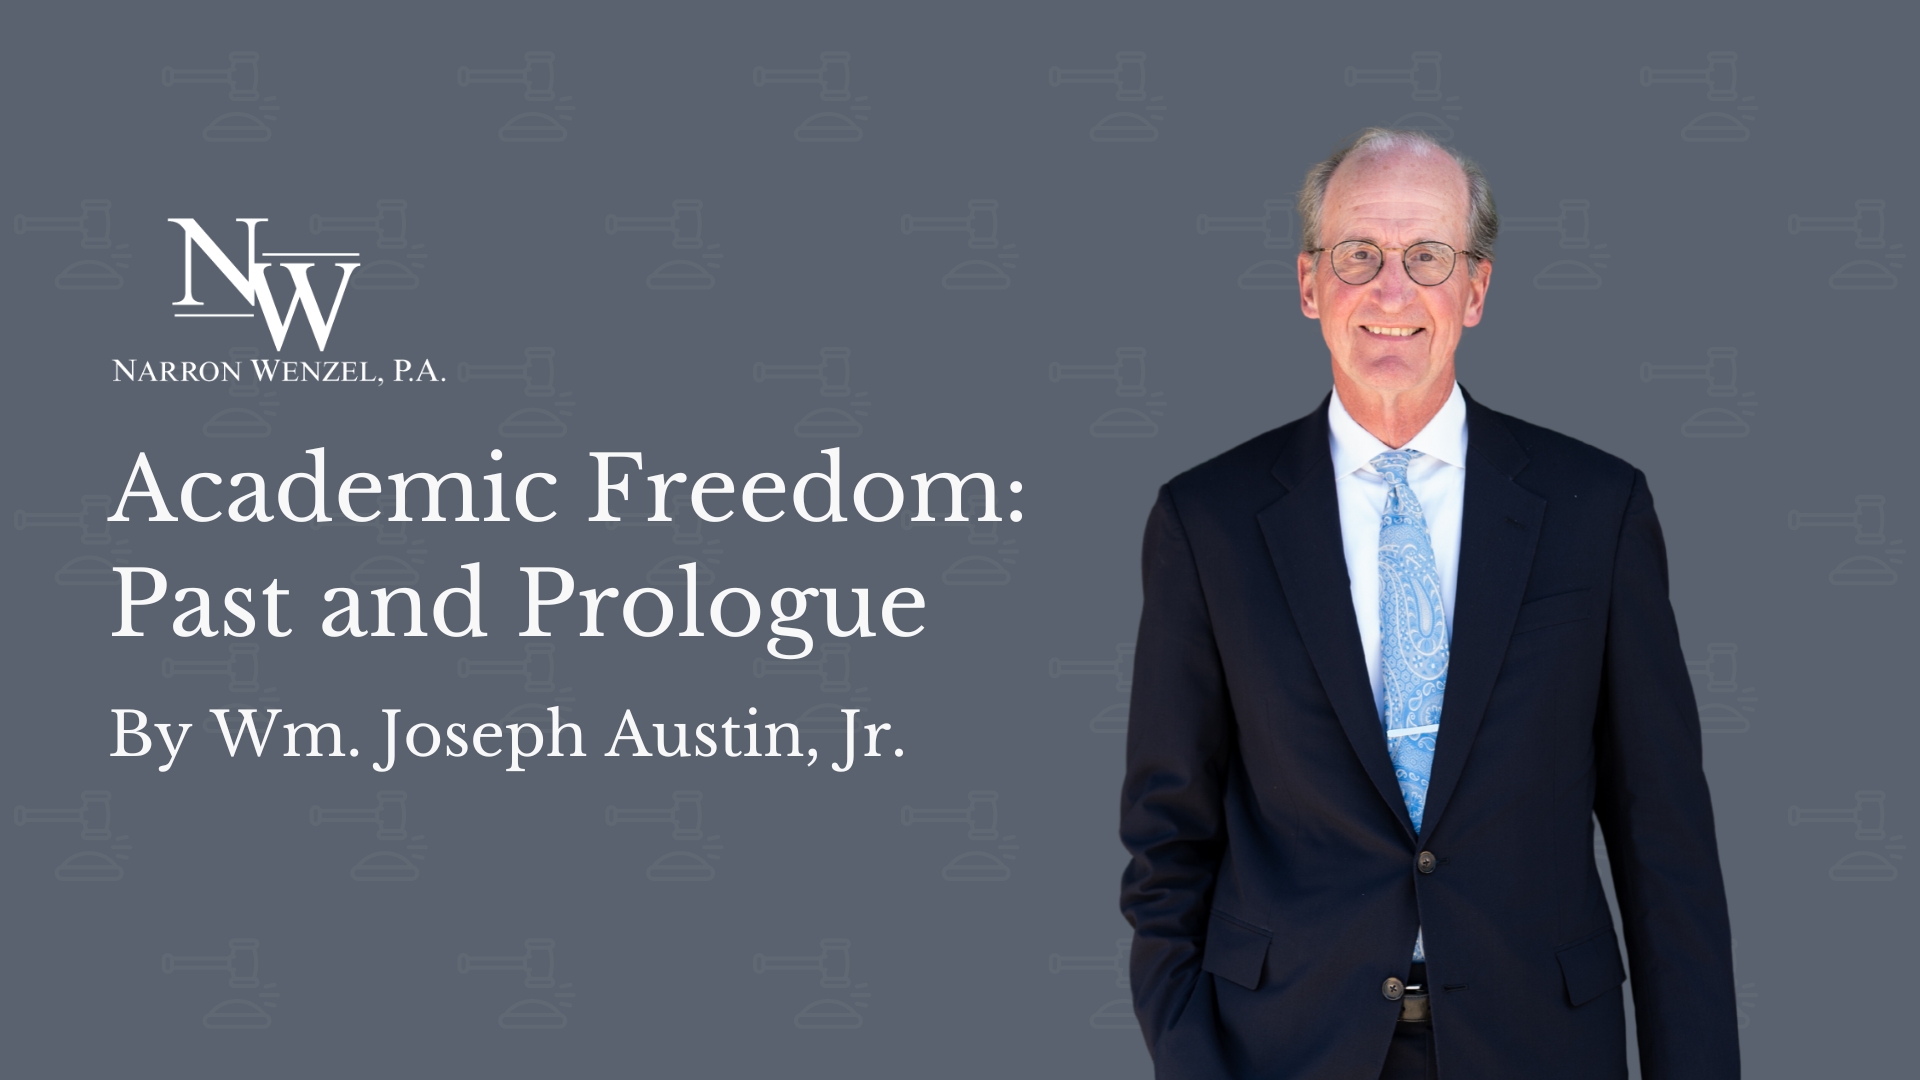 Academic Freedom: Past and Prologue - Narron Wenzel, P.A.